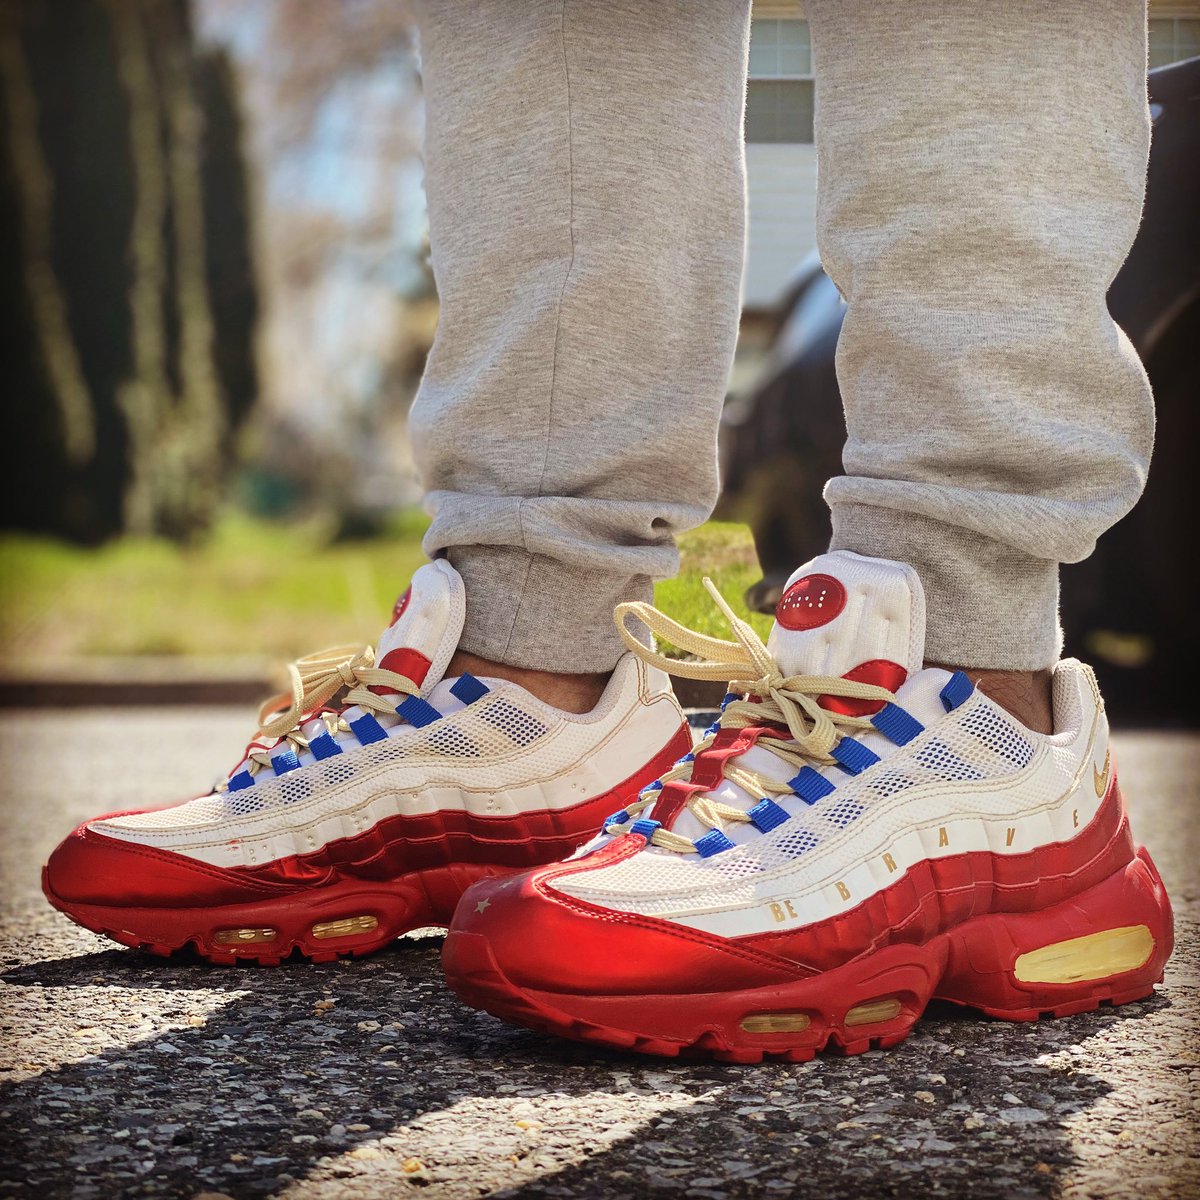 Nike Air Max 95 "Doernbecher" Nike Sole Collector